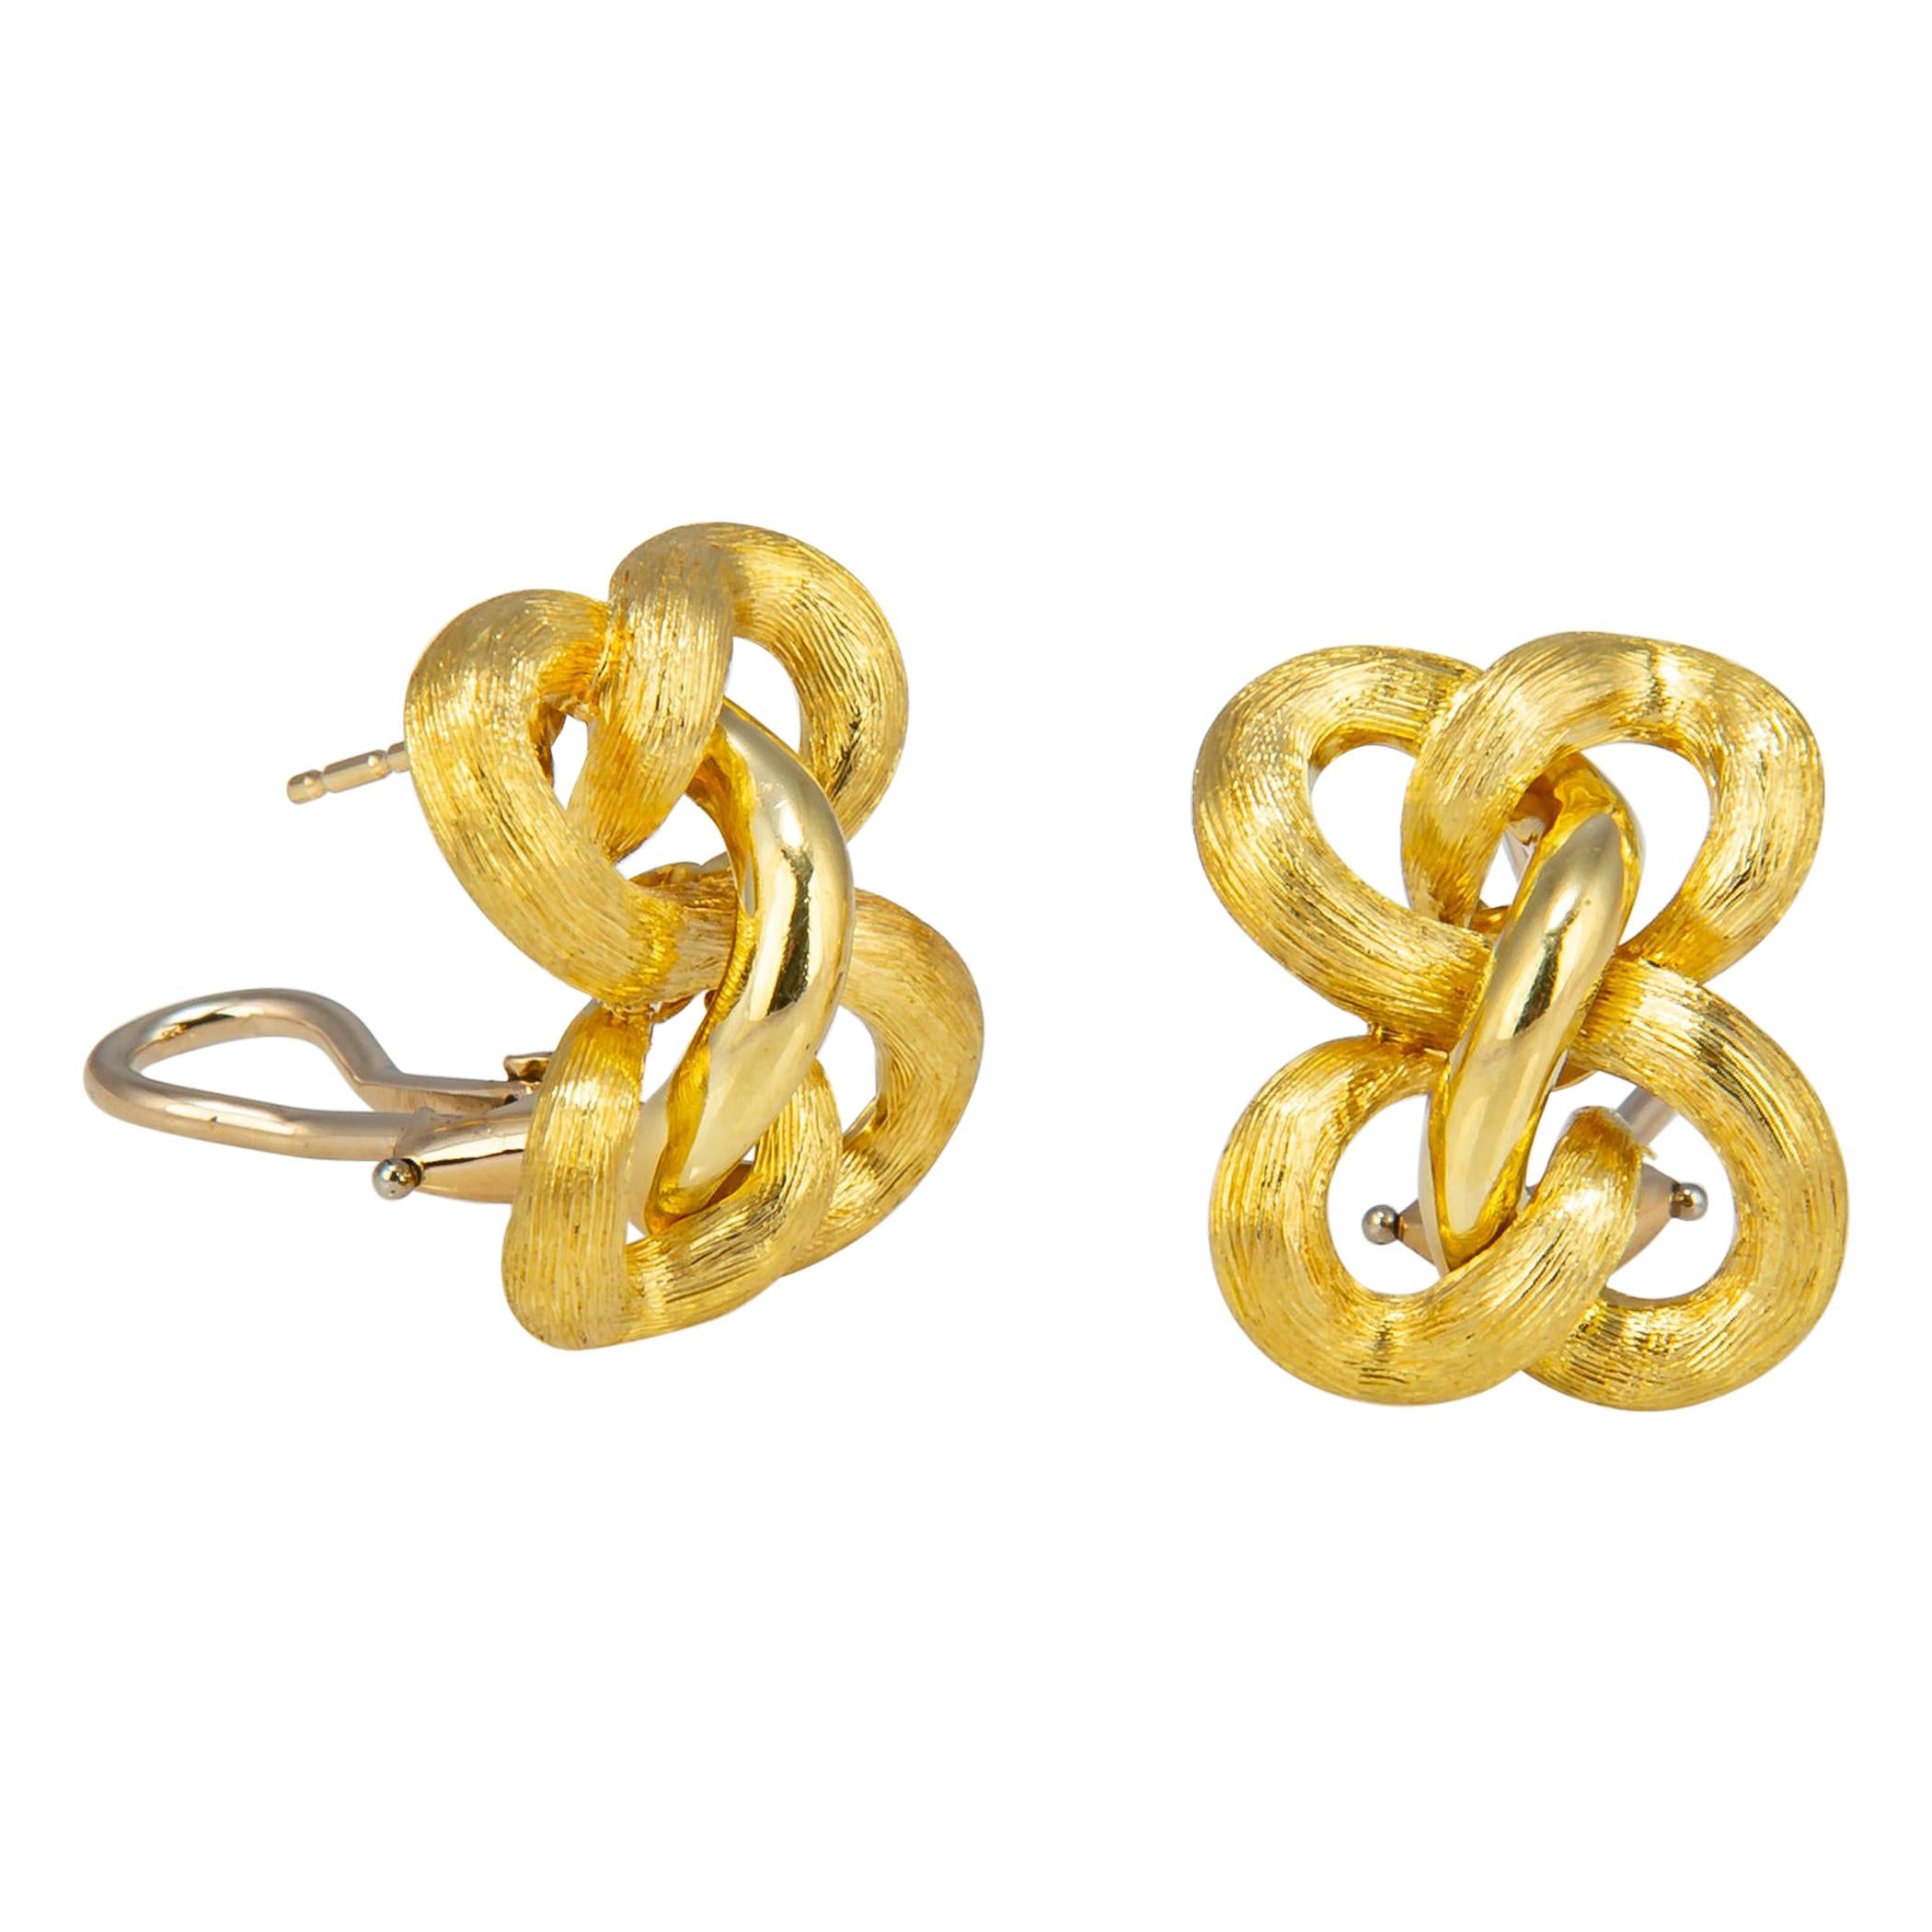 Henry Dunay Sabi and Shiny Open Knot Motif Earrings